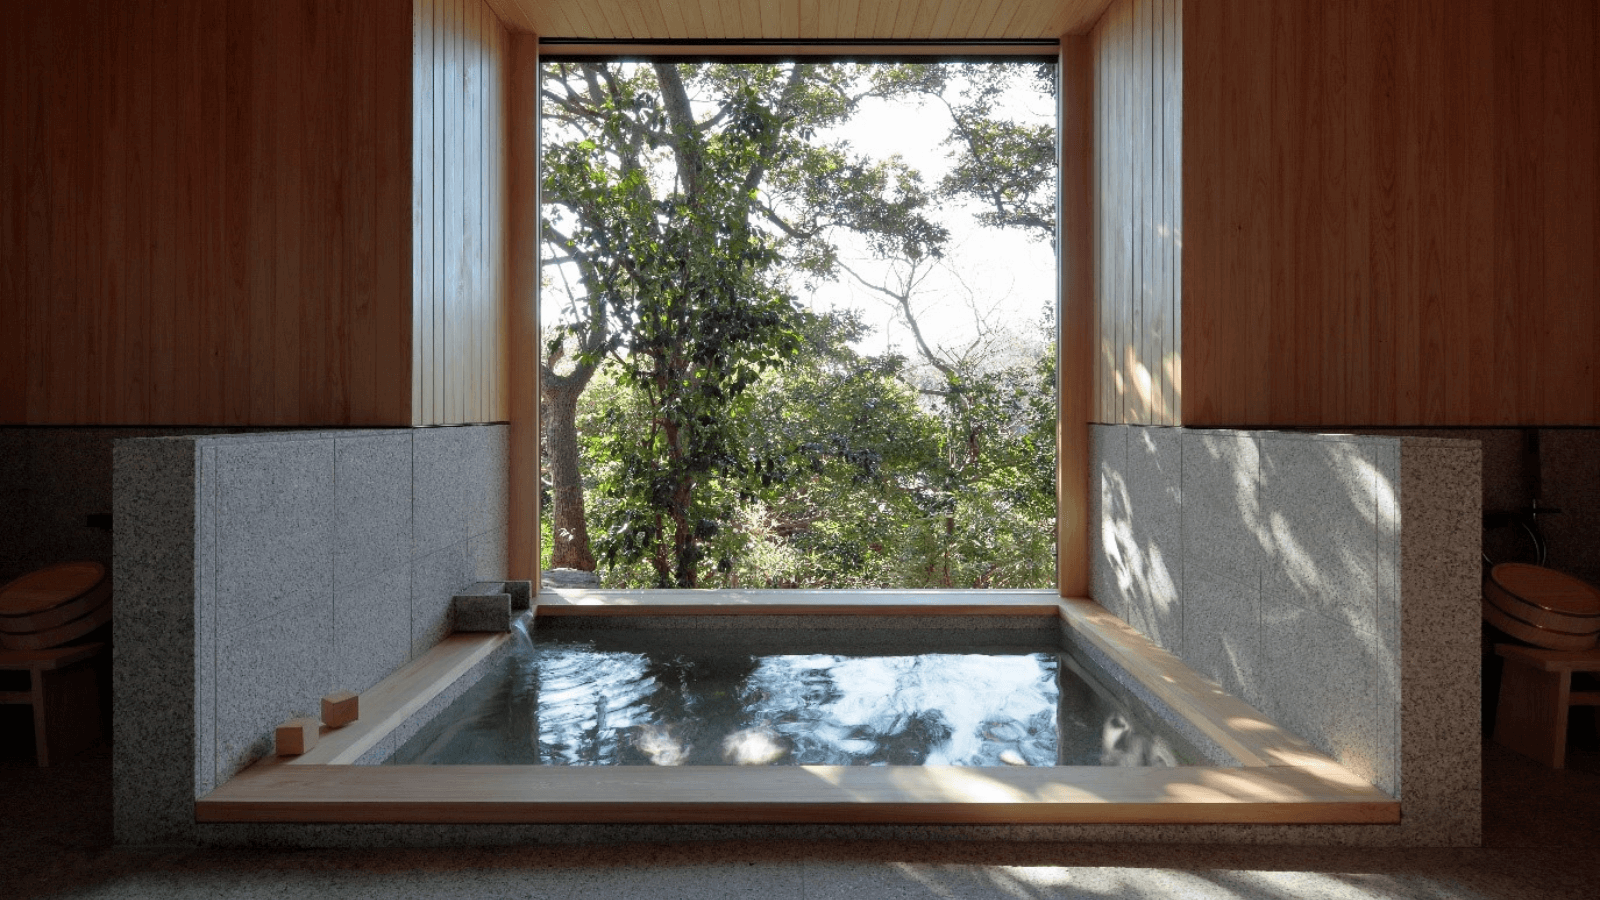 HEALING THROUGH THE CENTURIES: TRACING THE HISTORY OF BATH ARCHITECTURE IN JAPAN